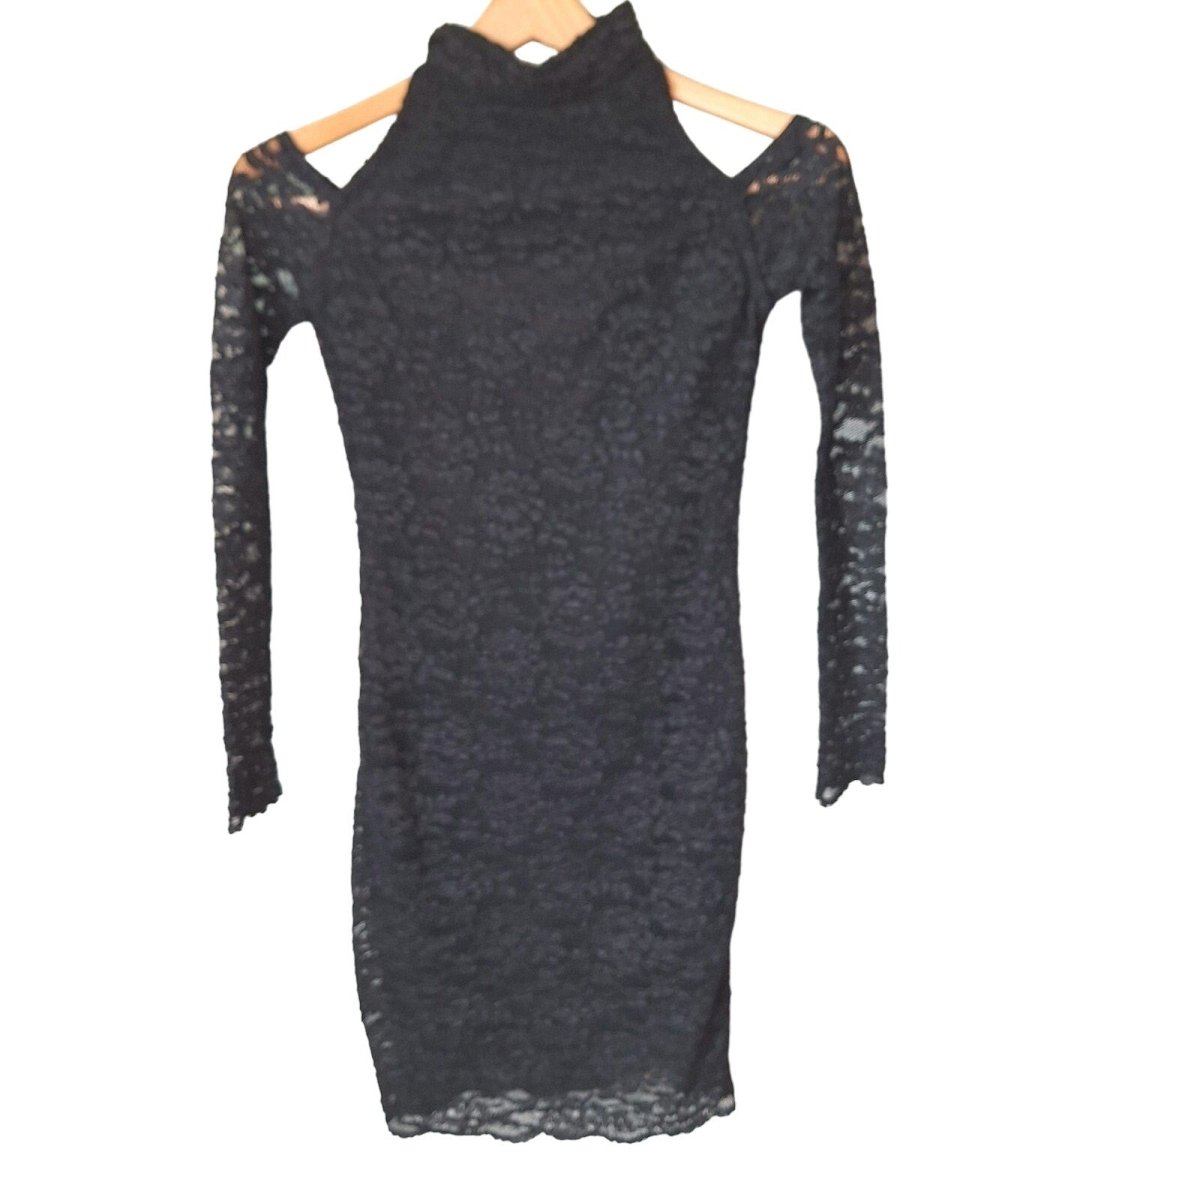 Vintage 80s/90s Black Lace Mini Dress Women Size XS to Small - themallvintage The Mall Vintage 1980s 1990s Dresses